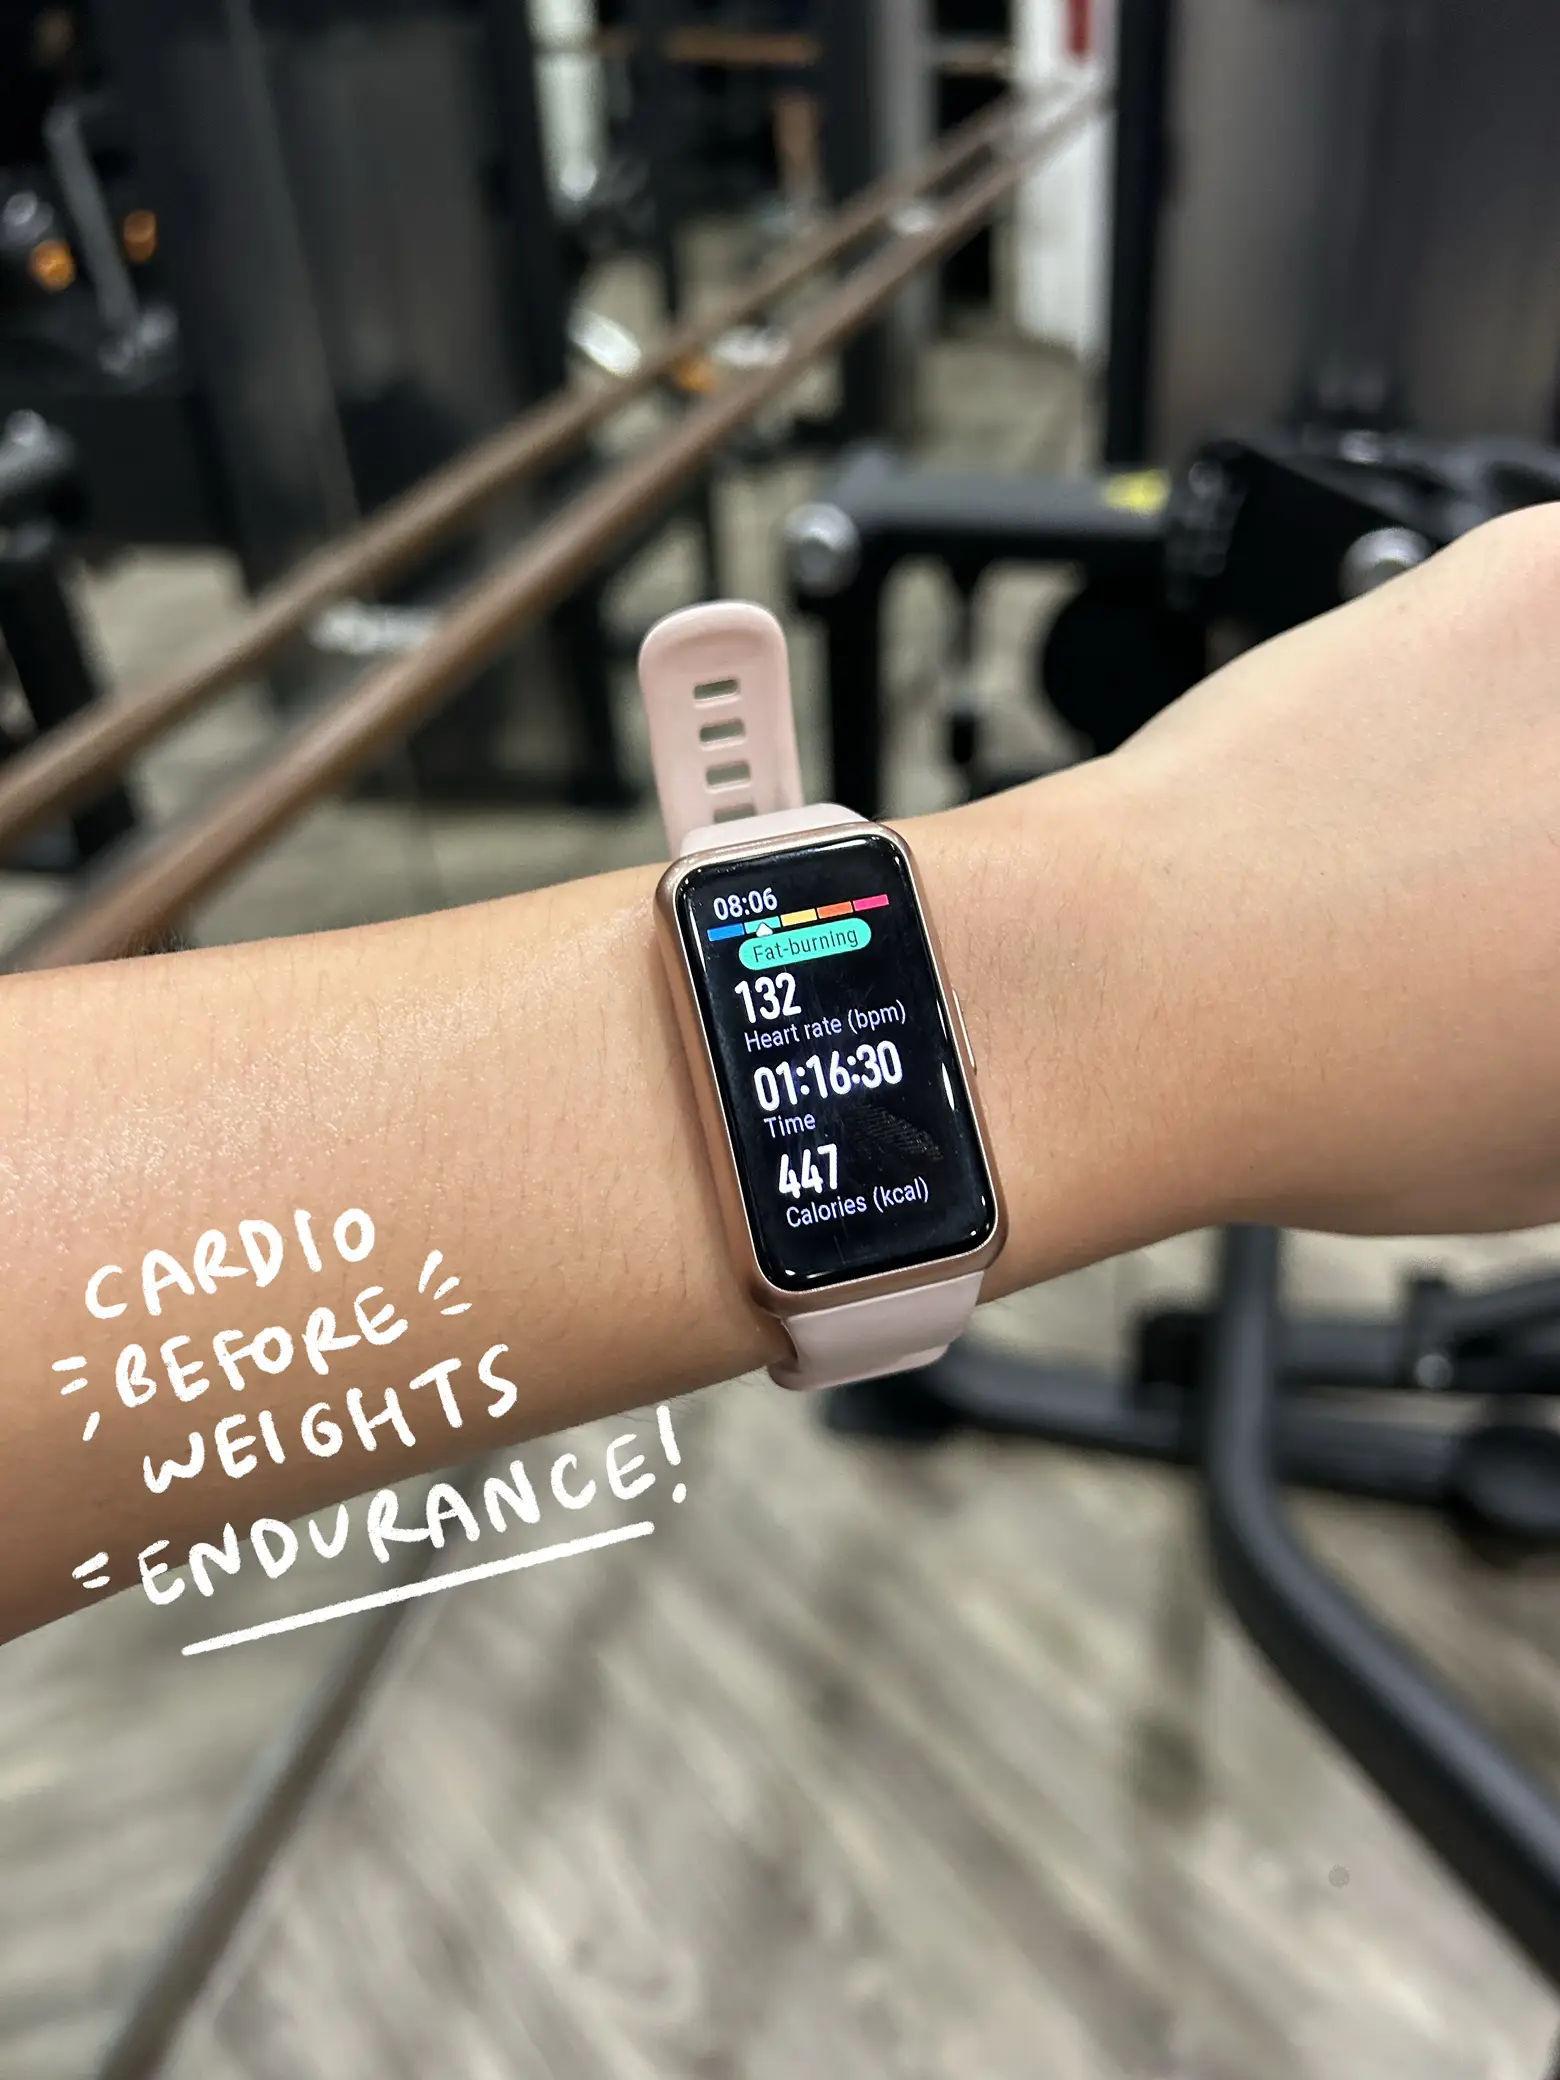 trying to lose weight? do cardio AFTER weights! 🥵🏃‍♀️'s images(1)